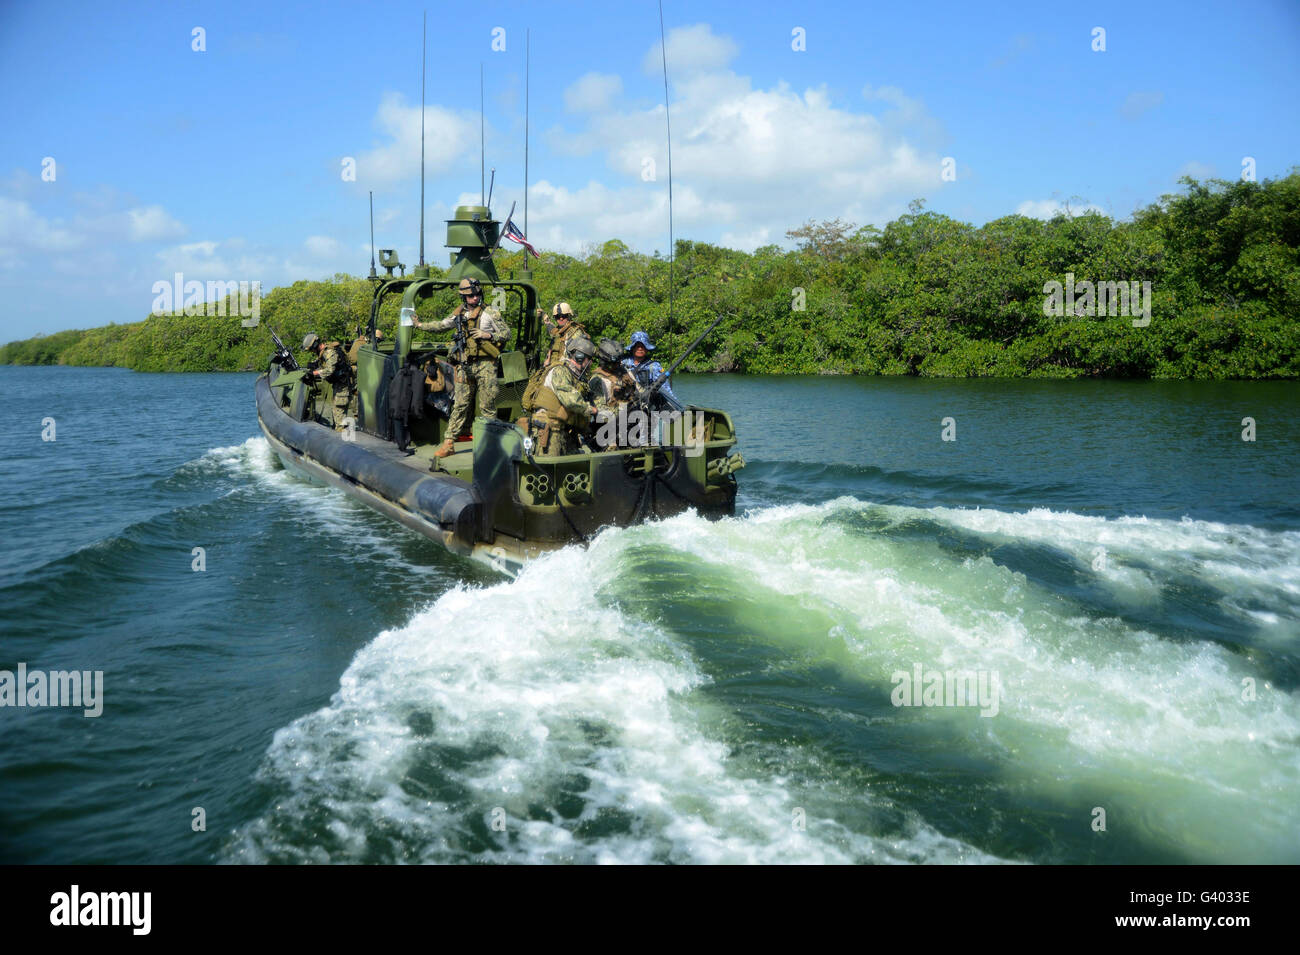 U.S. Sailors transit to a rendezvous point with Belizean service members. Stock Photo